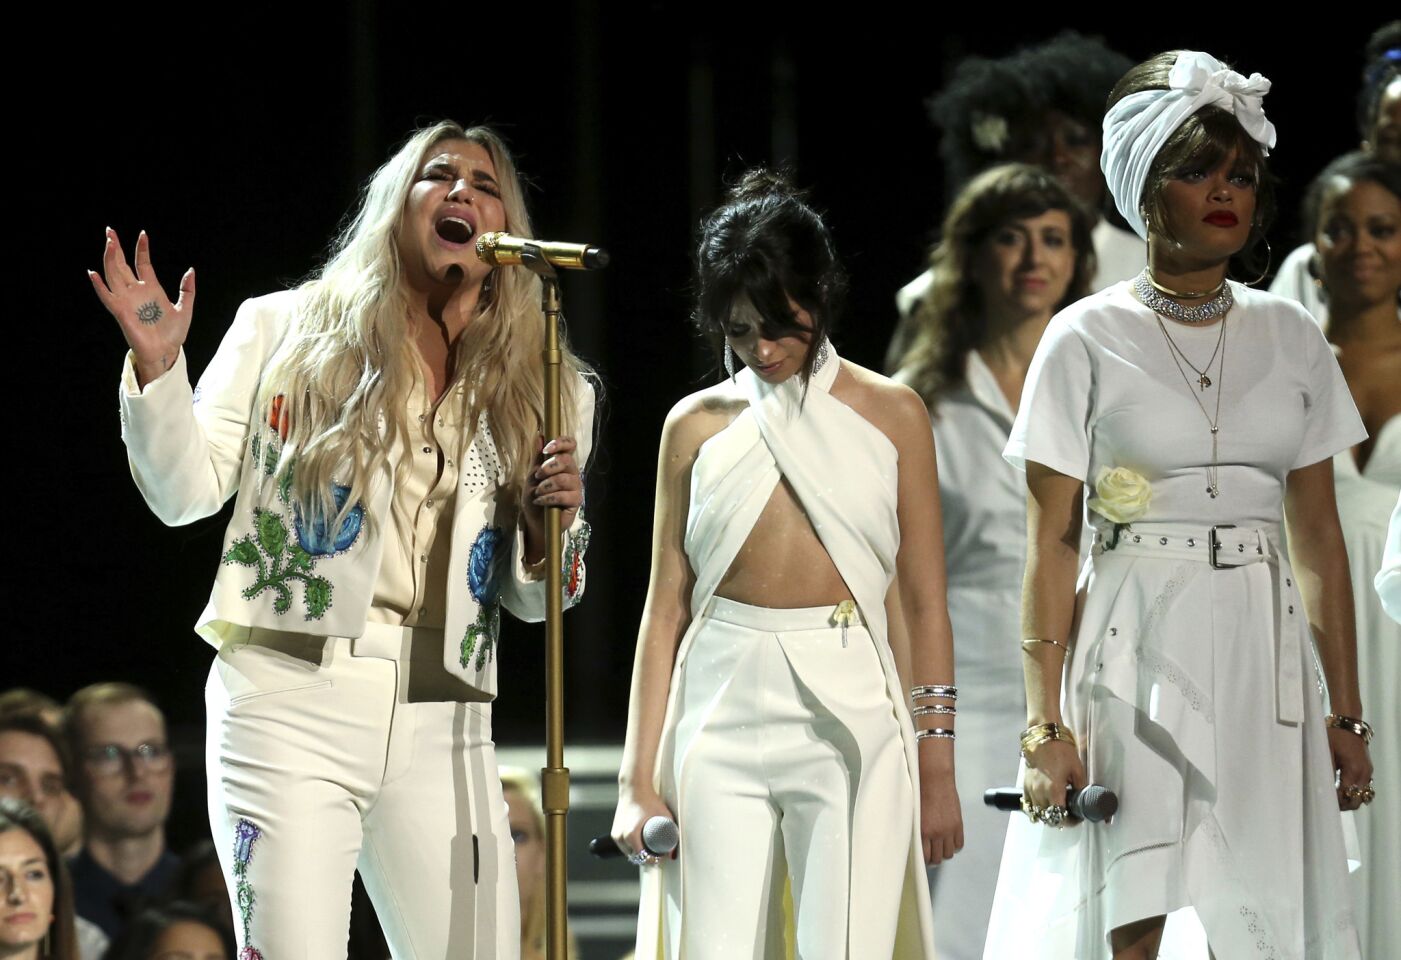 Kesha, left, performs "Praying" as Camila Cabello, center, and Andra Day stand by.